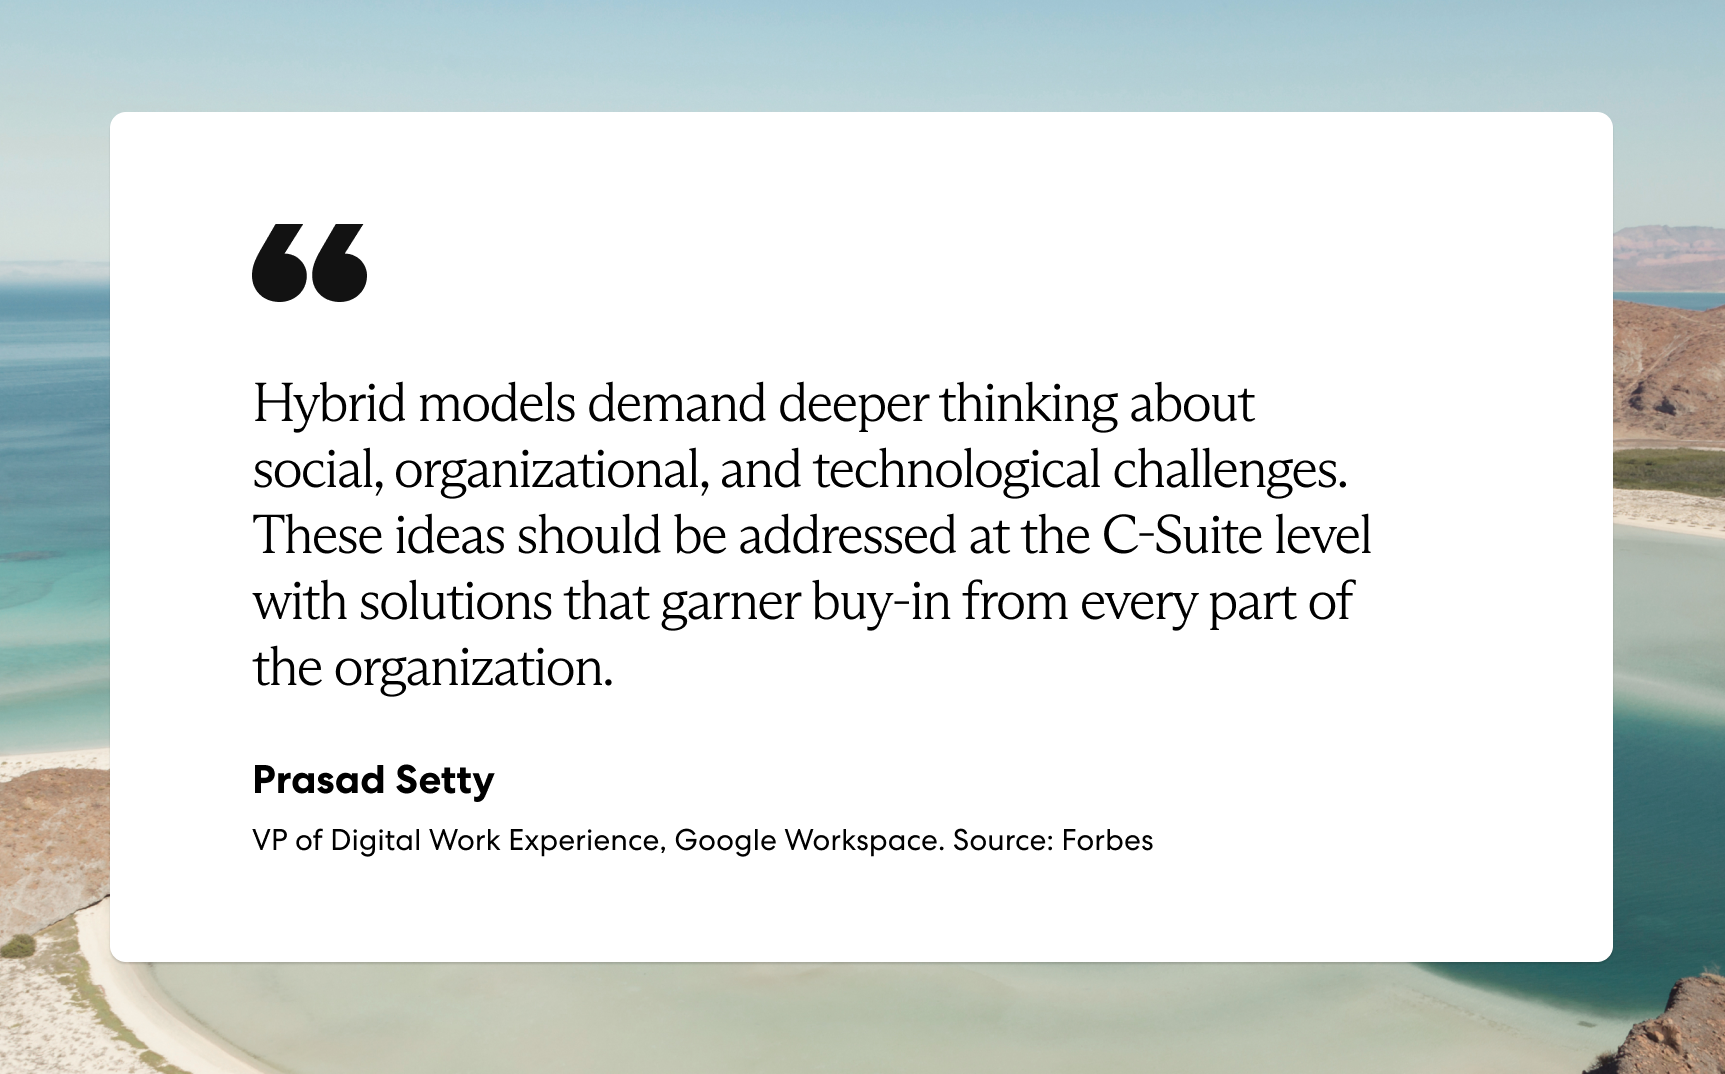 “Hybrid models demand deeper thinking about social, organizational, and technological challenges. These ideas should be addressed at the C-Suite level with solutions that garner buy-in from every part of the organization.”